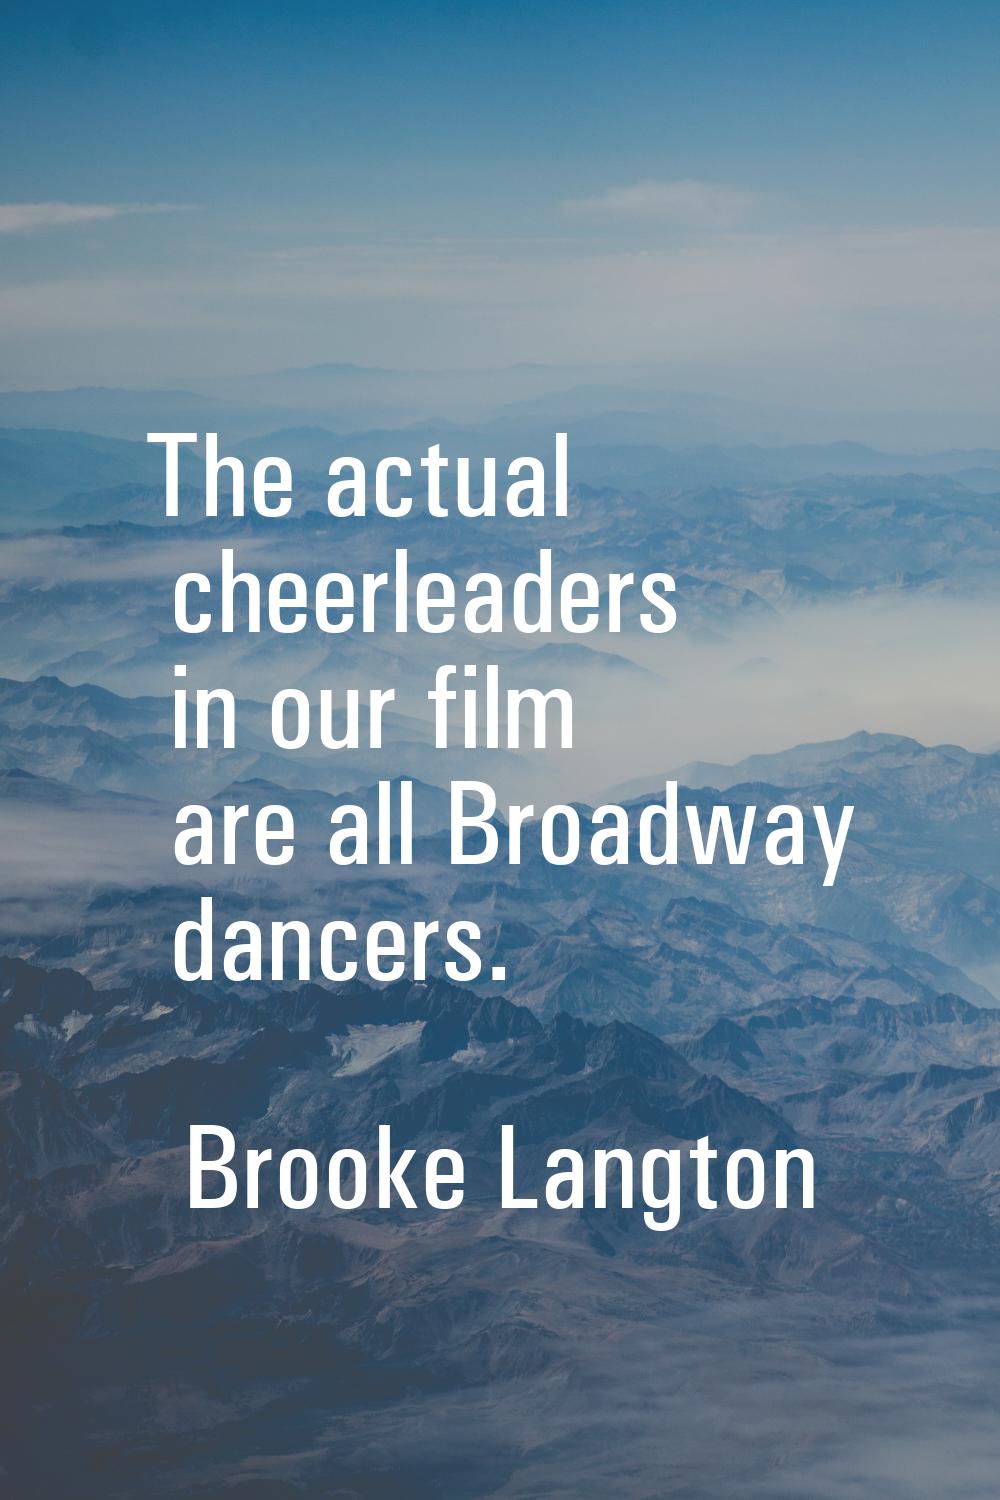 The actual cheerleaders in our film are all Broadway dancers.